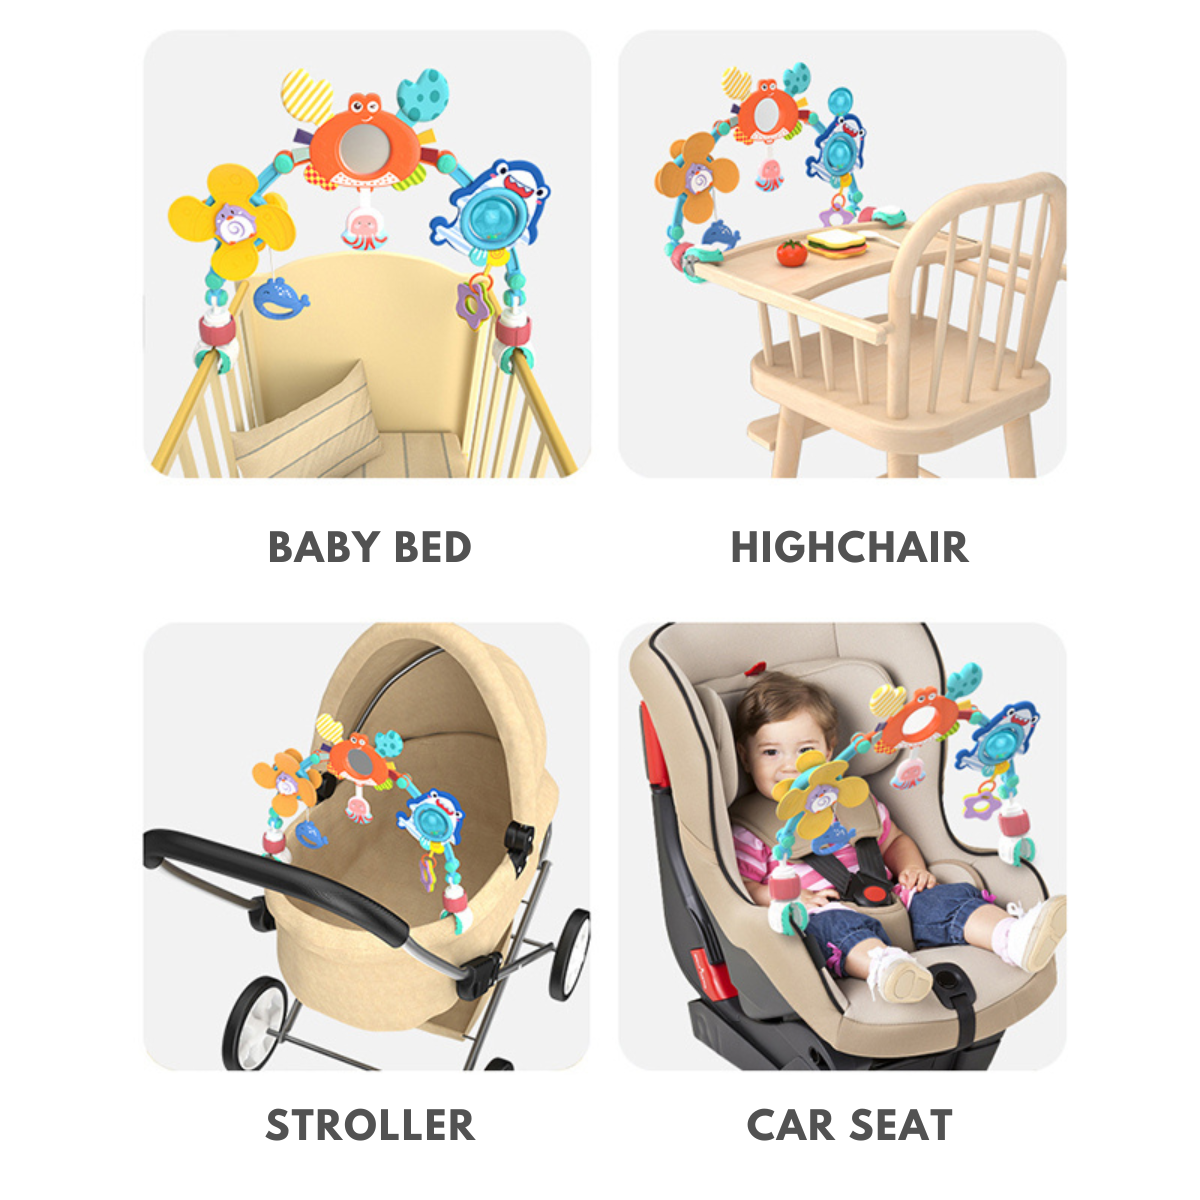 Newborn Baby Toy Crib Mobile, Hanging 0-1 Year Old Car Seat Safety Chair Soothing Infant Toy, Educational Stroller Toy Pendant with 6 Features - Little Kooma